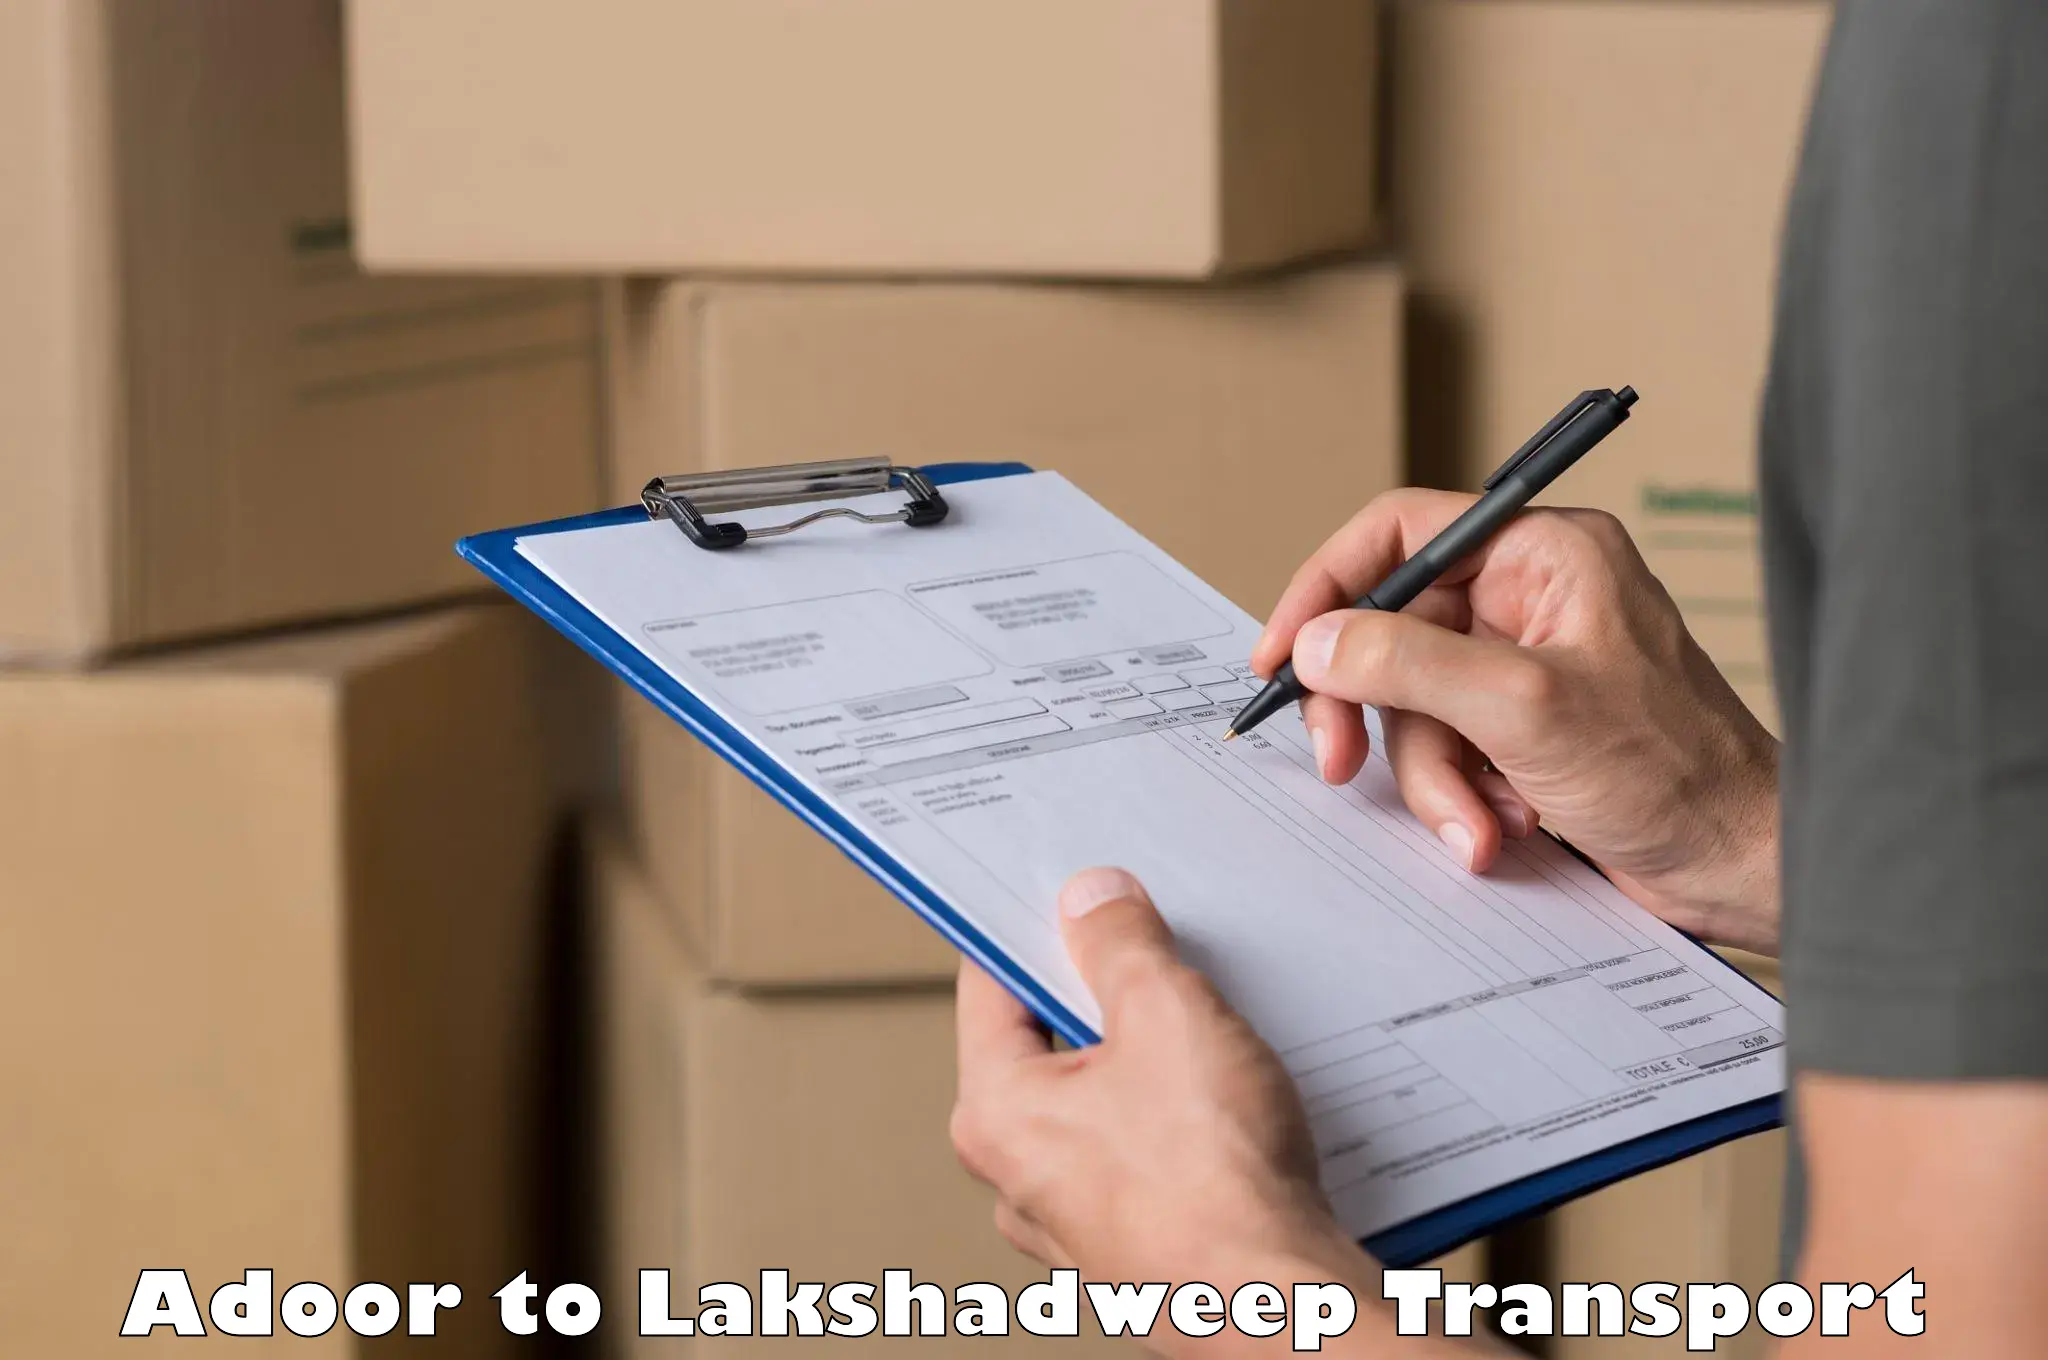 Commercial transport service Adoor to Lakshadweep